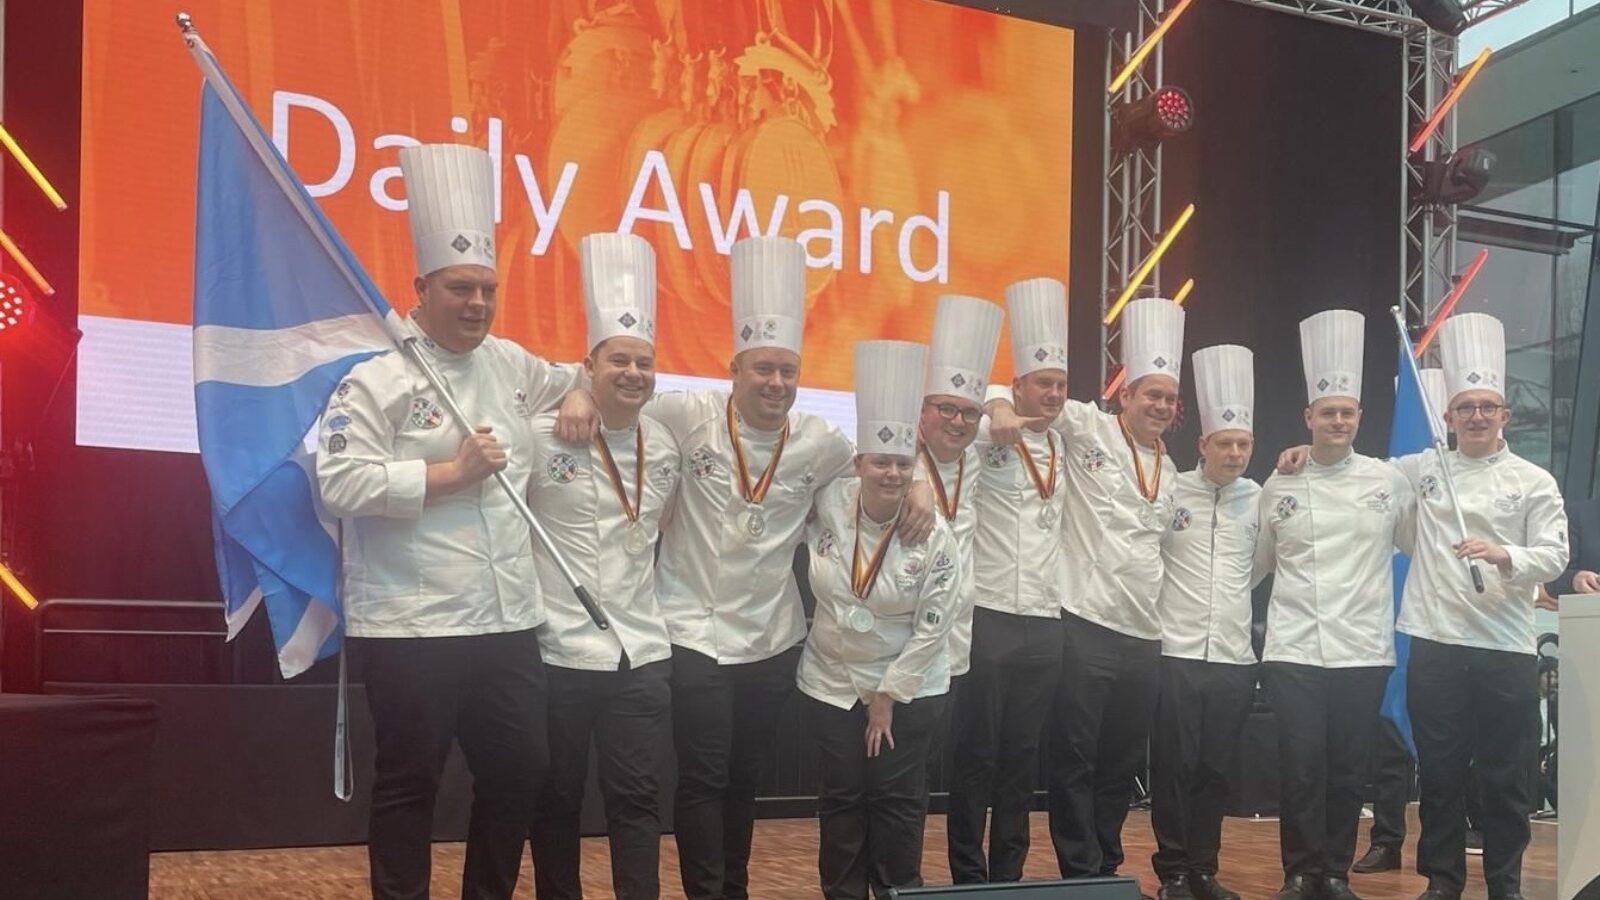 Celebrations for Scotland as Chefs’ take home two silver medals at Culinary Olympics